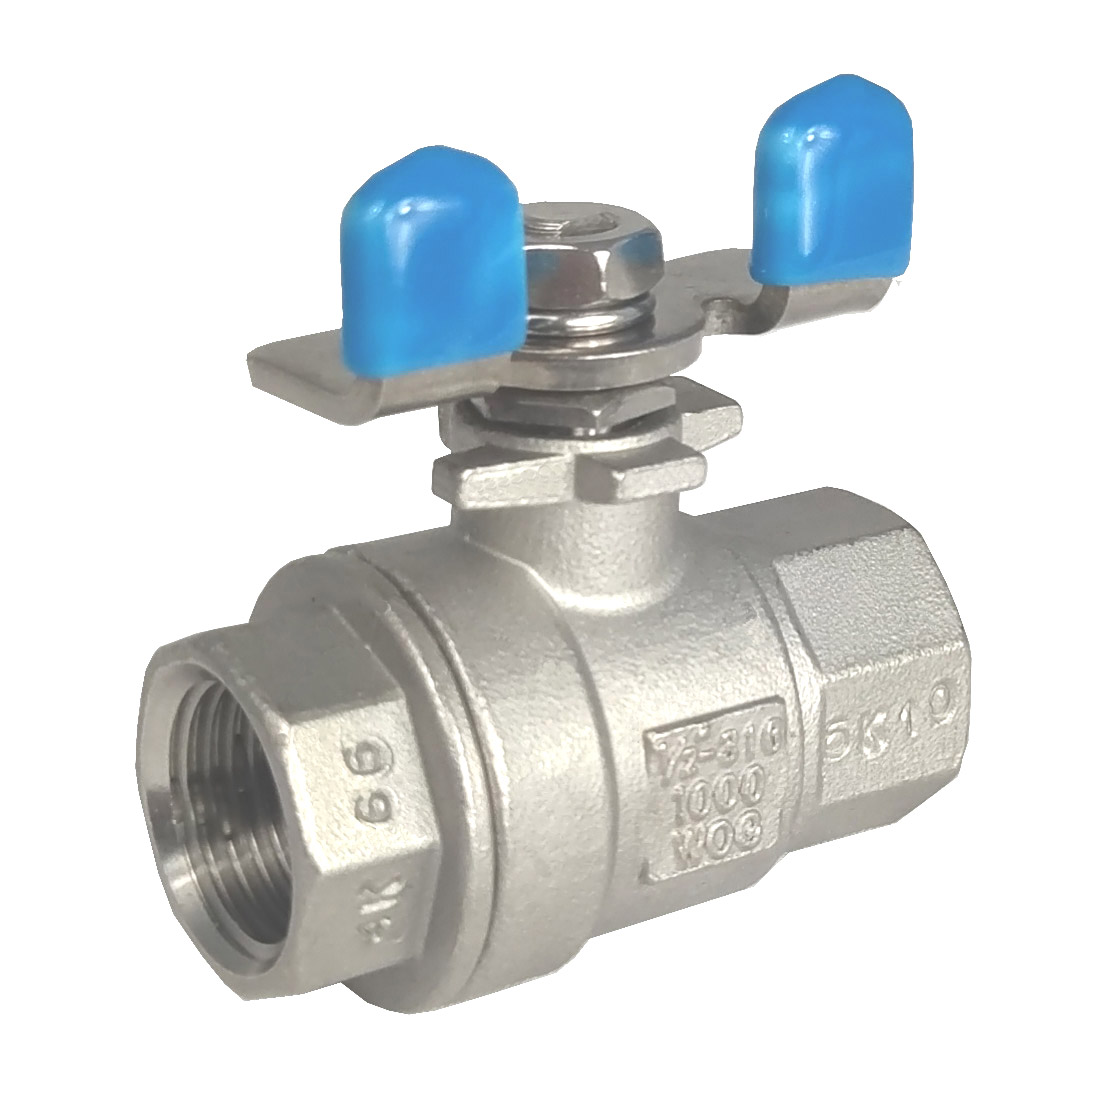 2-piece full port ball valve 1000 psi  butterfly handle